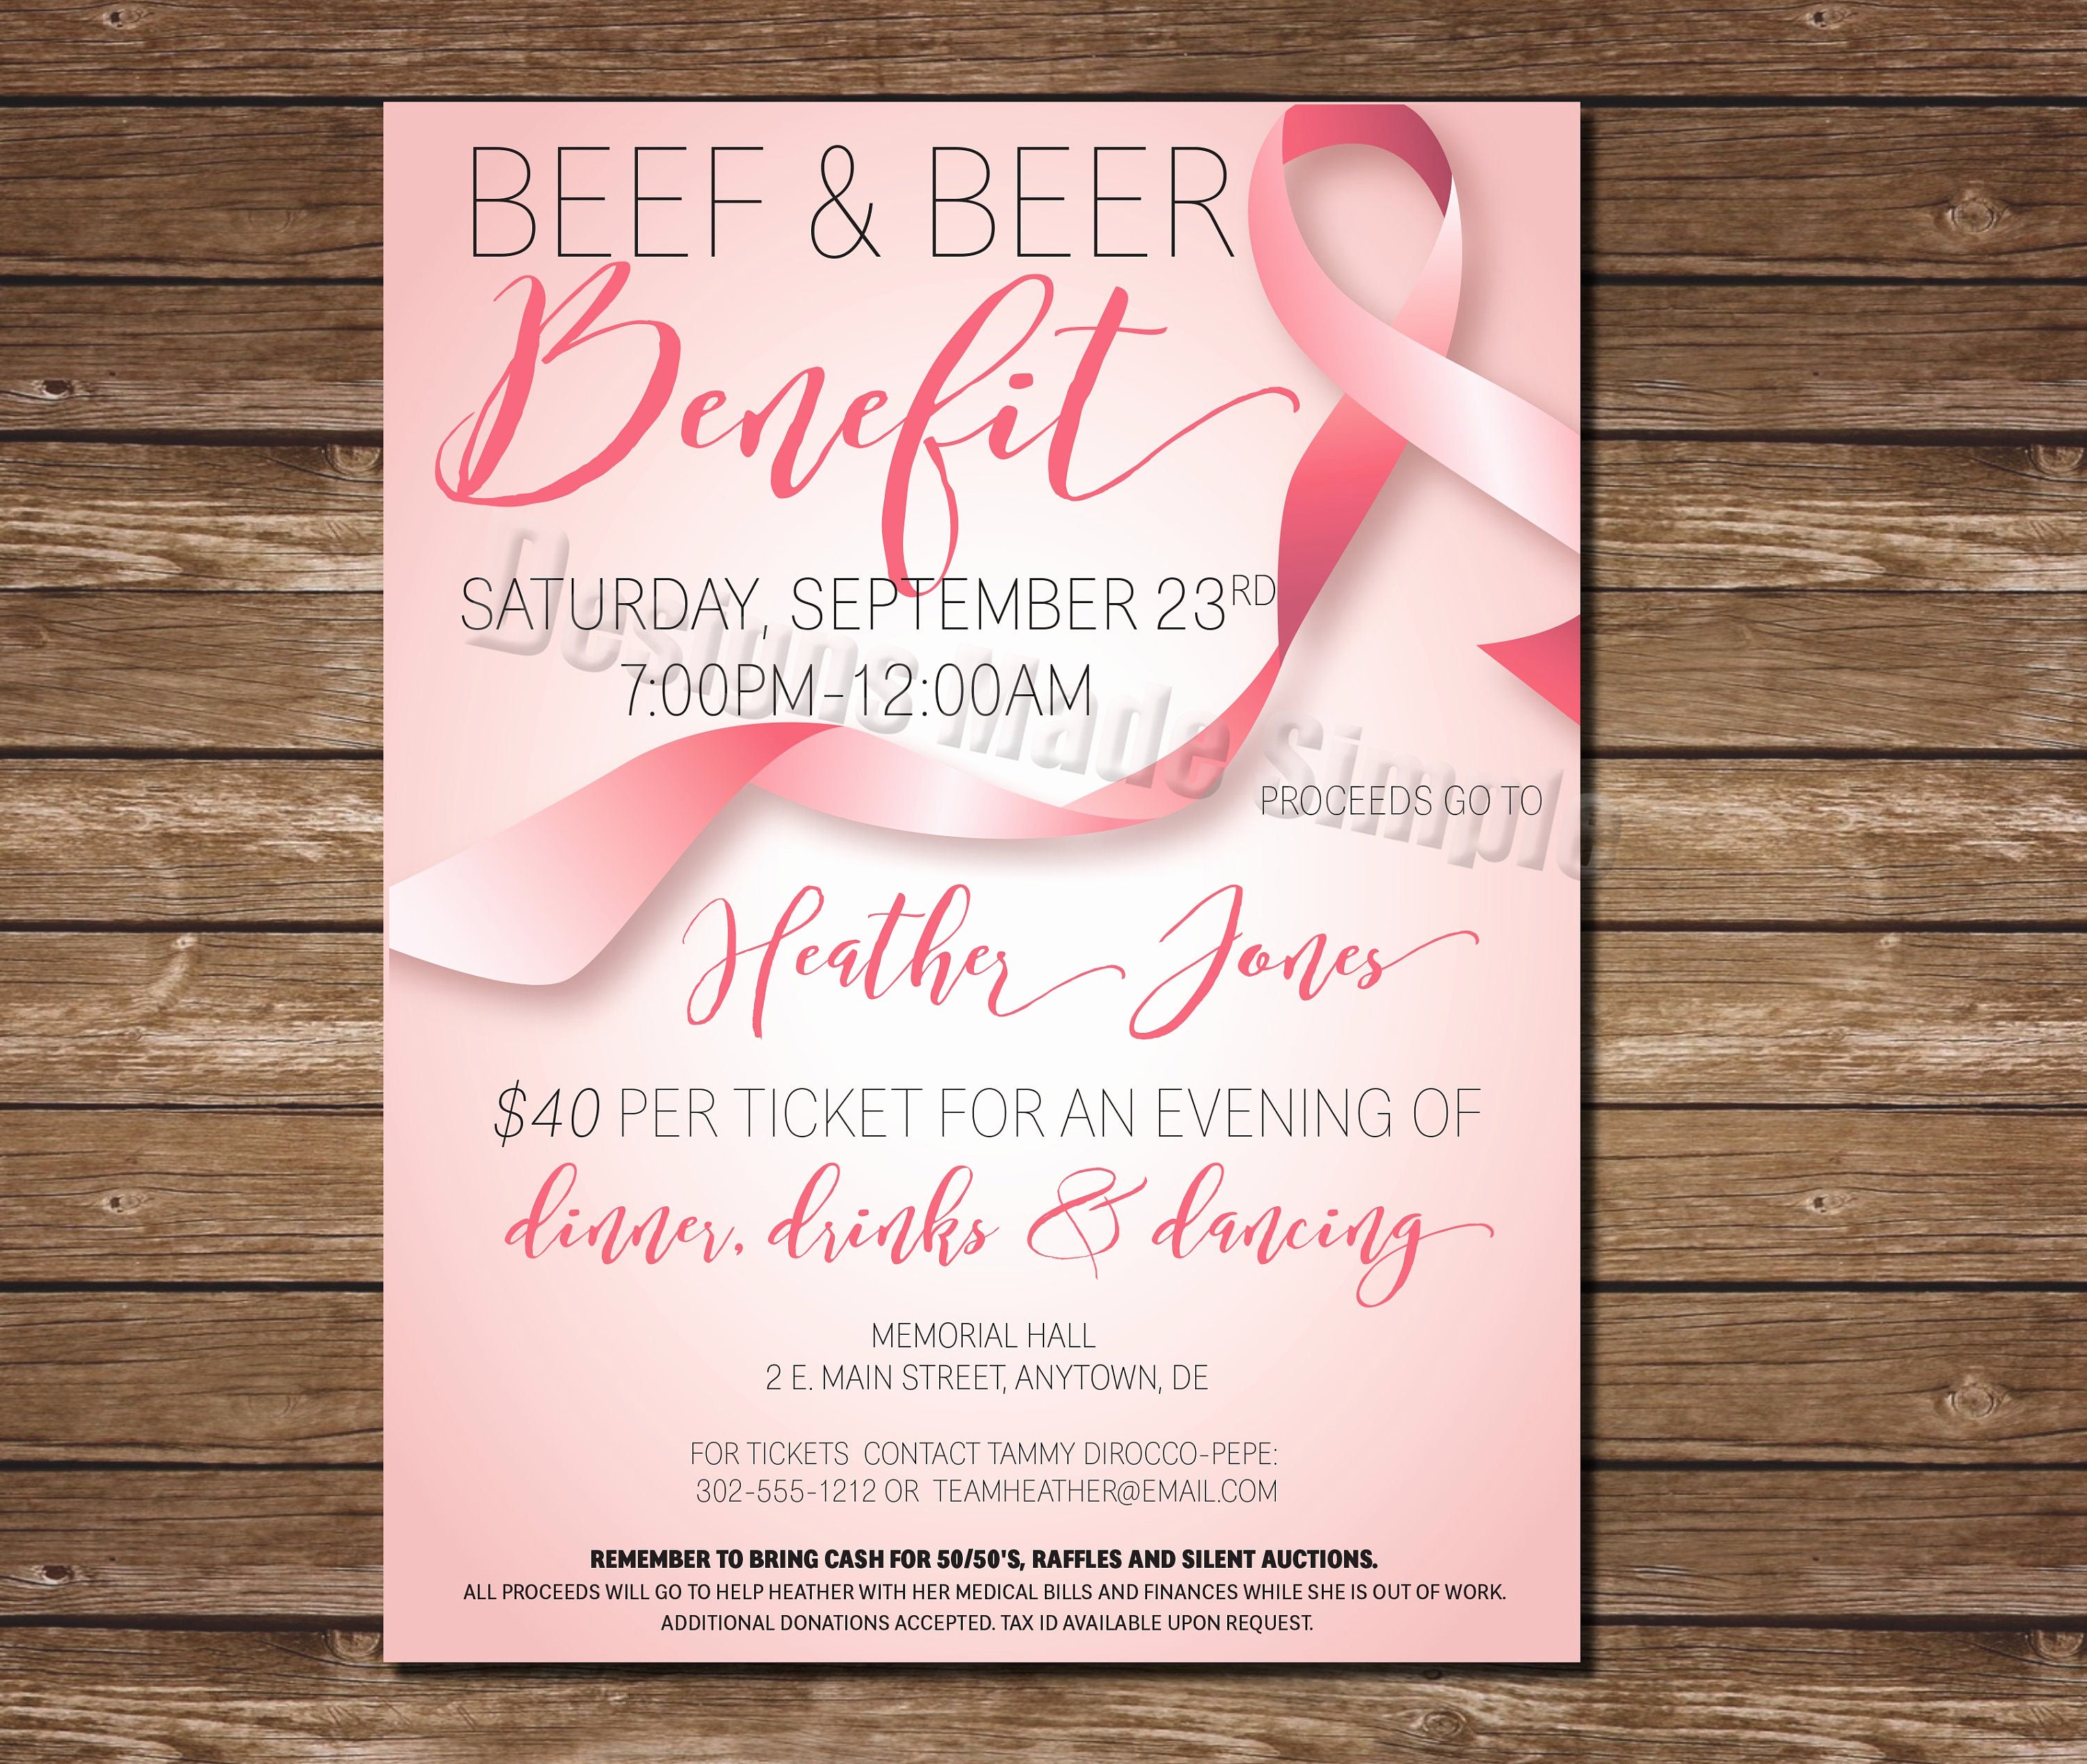 Breast Cancer Fundraiser Flyer Awesome Fundraiser event Flyer Breast Cancer event Beef and Beer